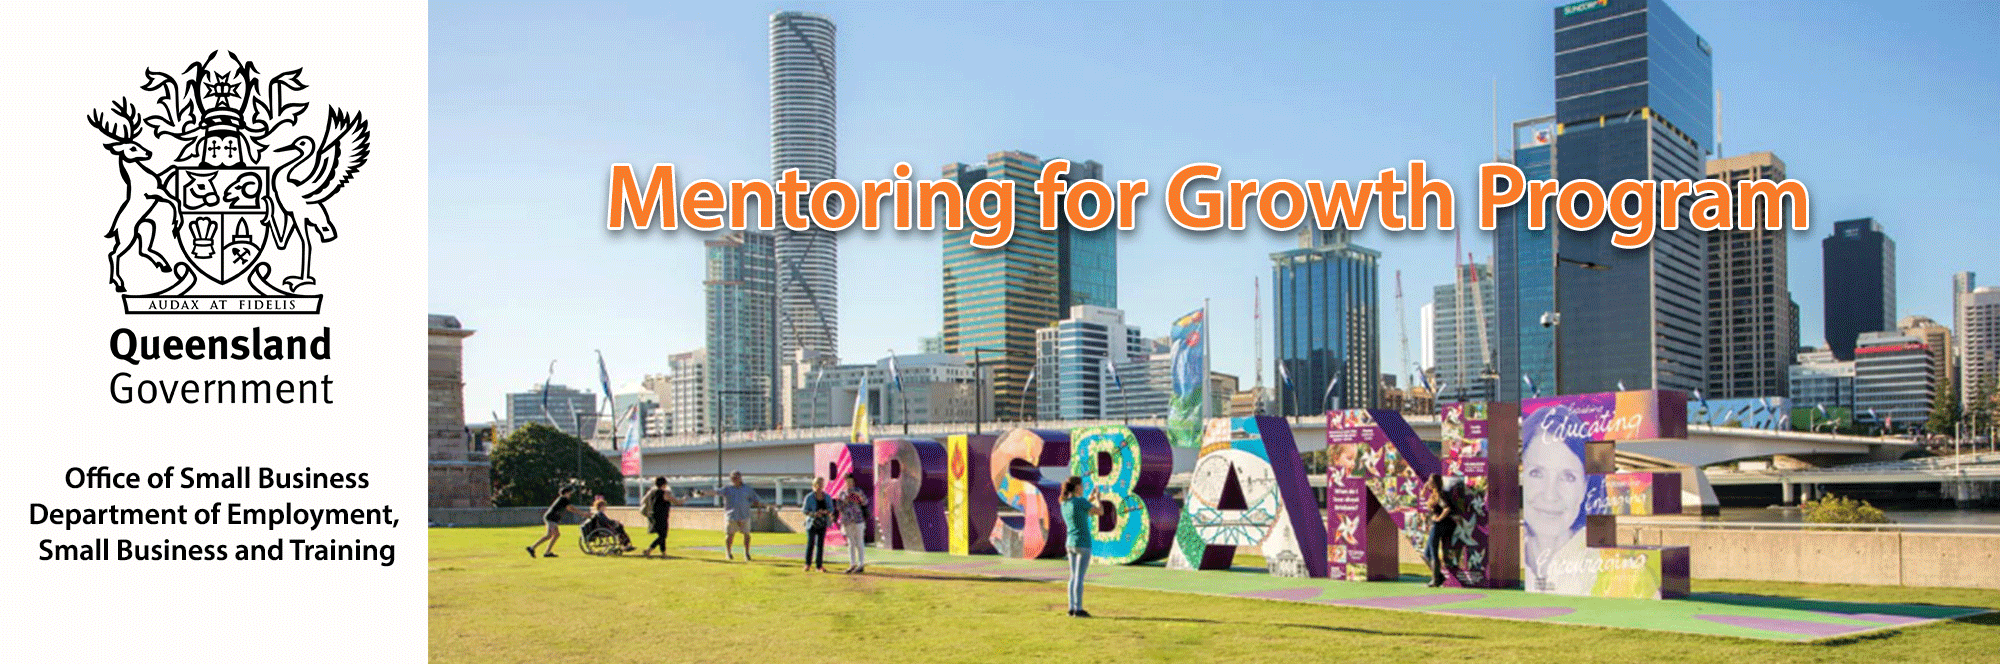 mentoring for growth